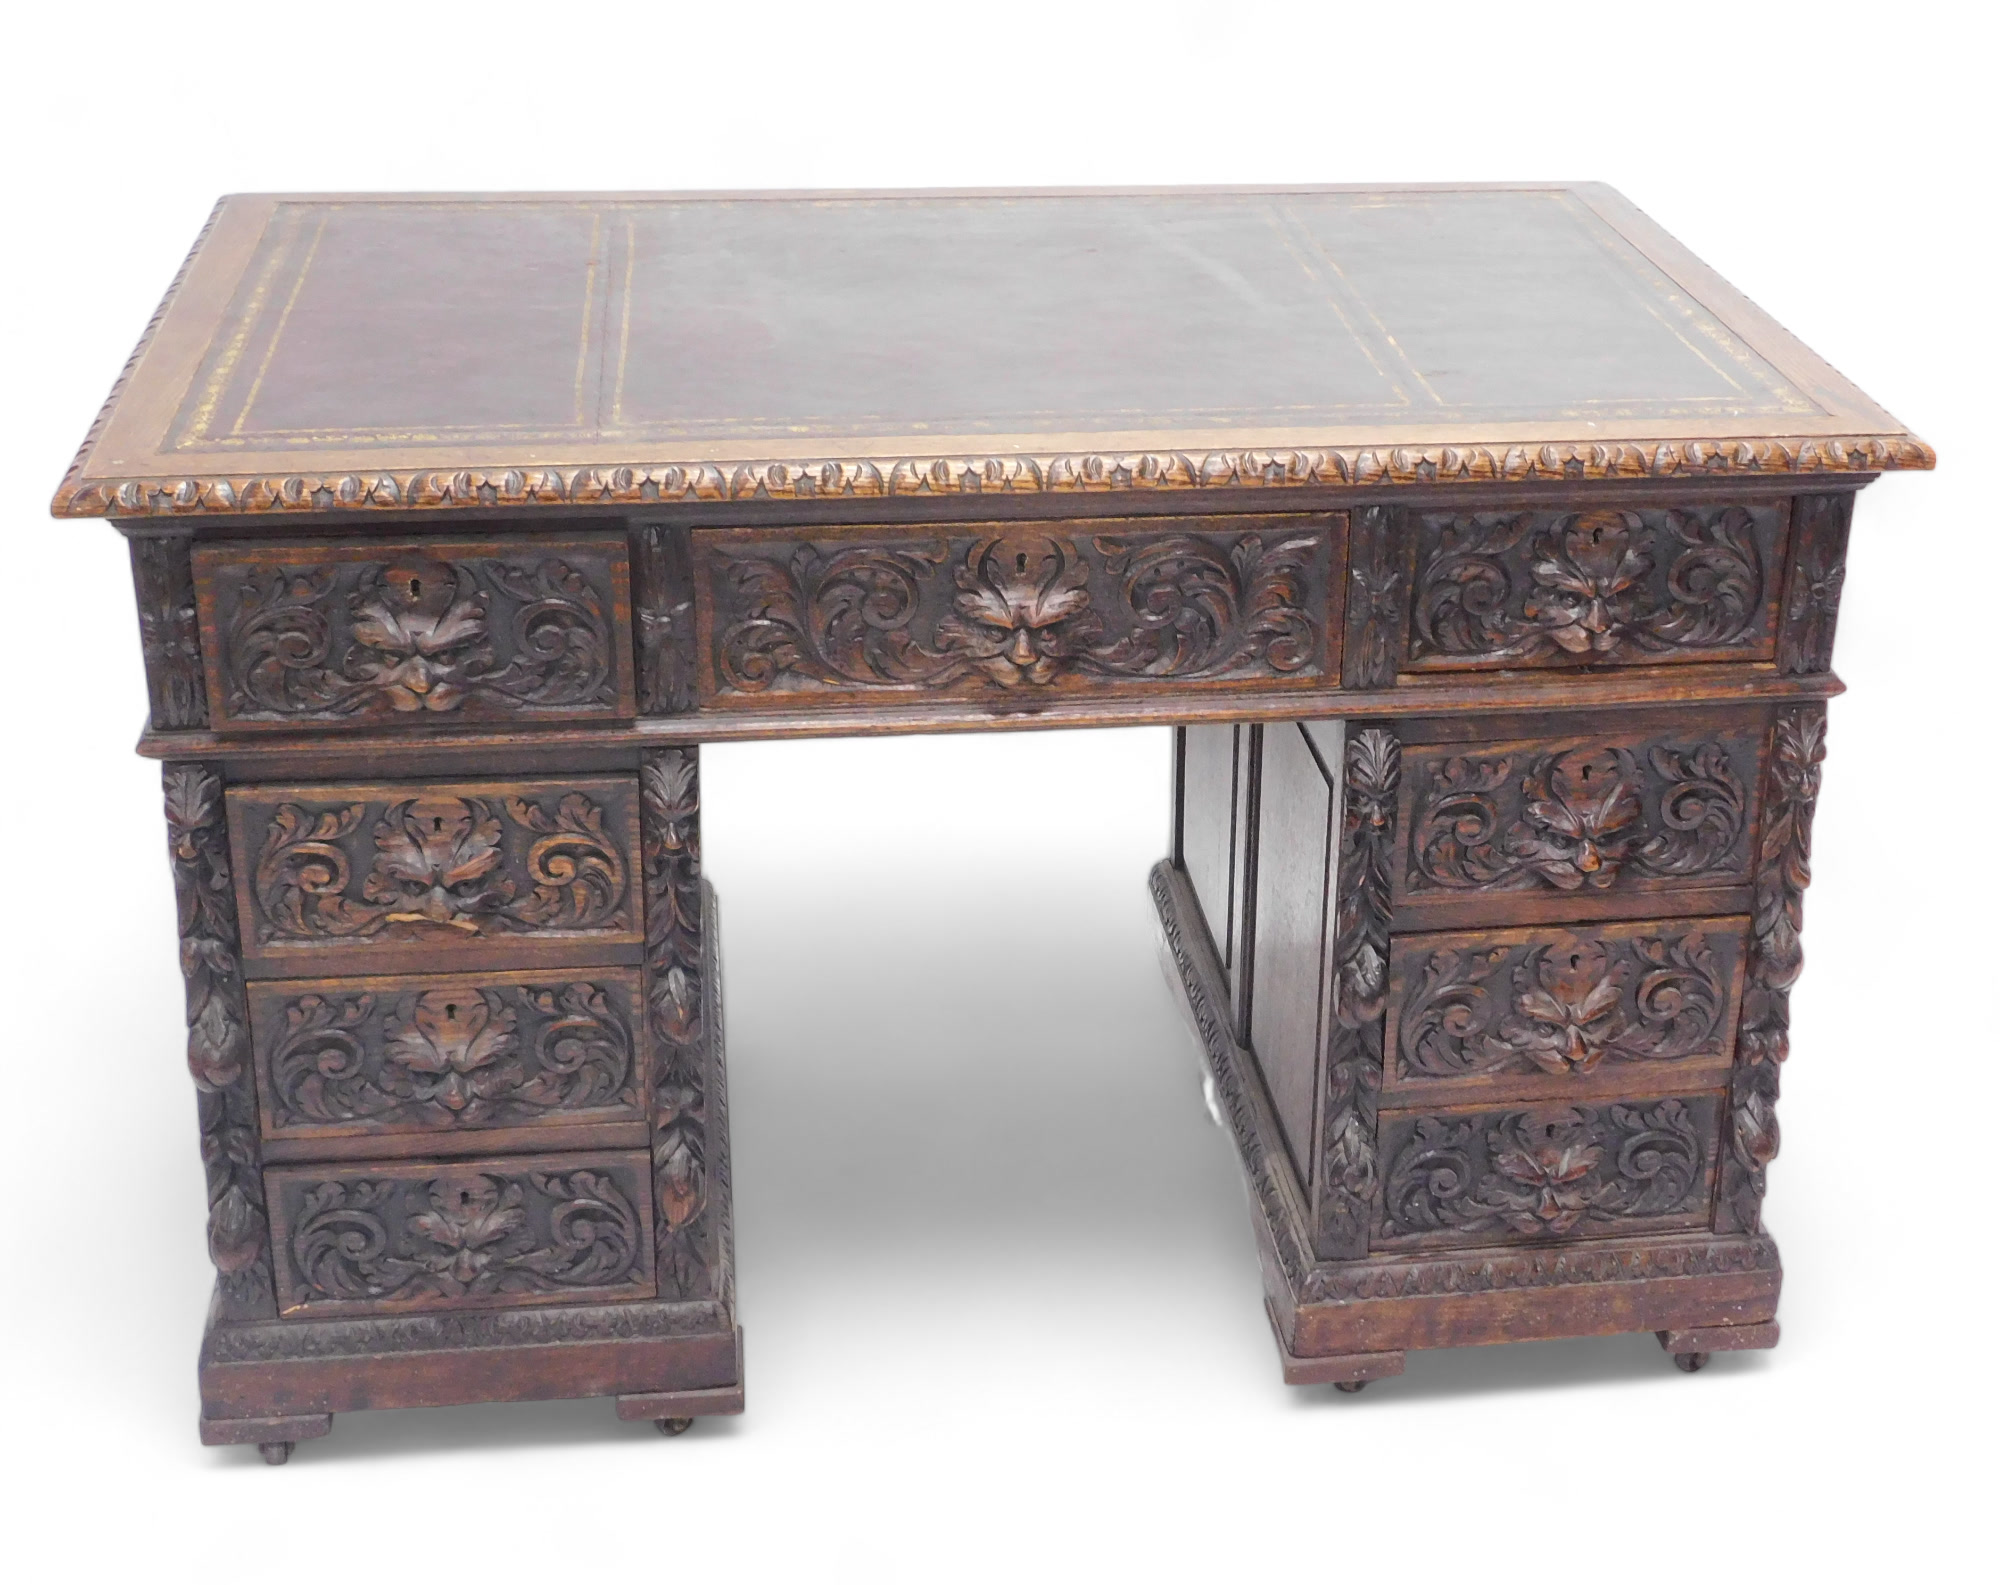 A late Victorian oak pedestal desk, carved with scrolls, leaves and masks, the rectangular top with